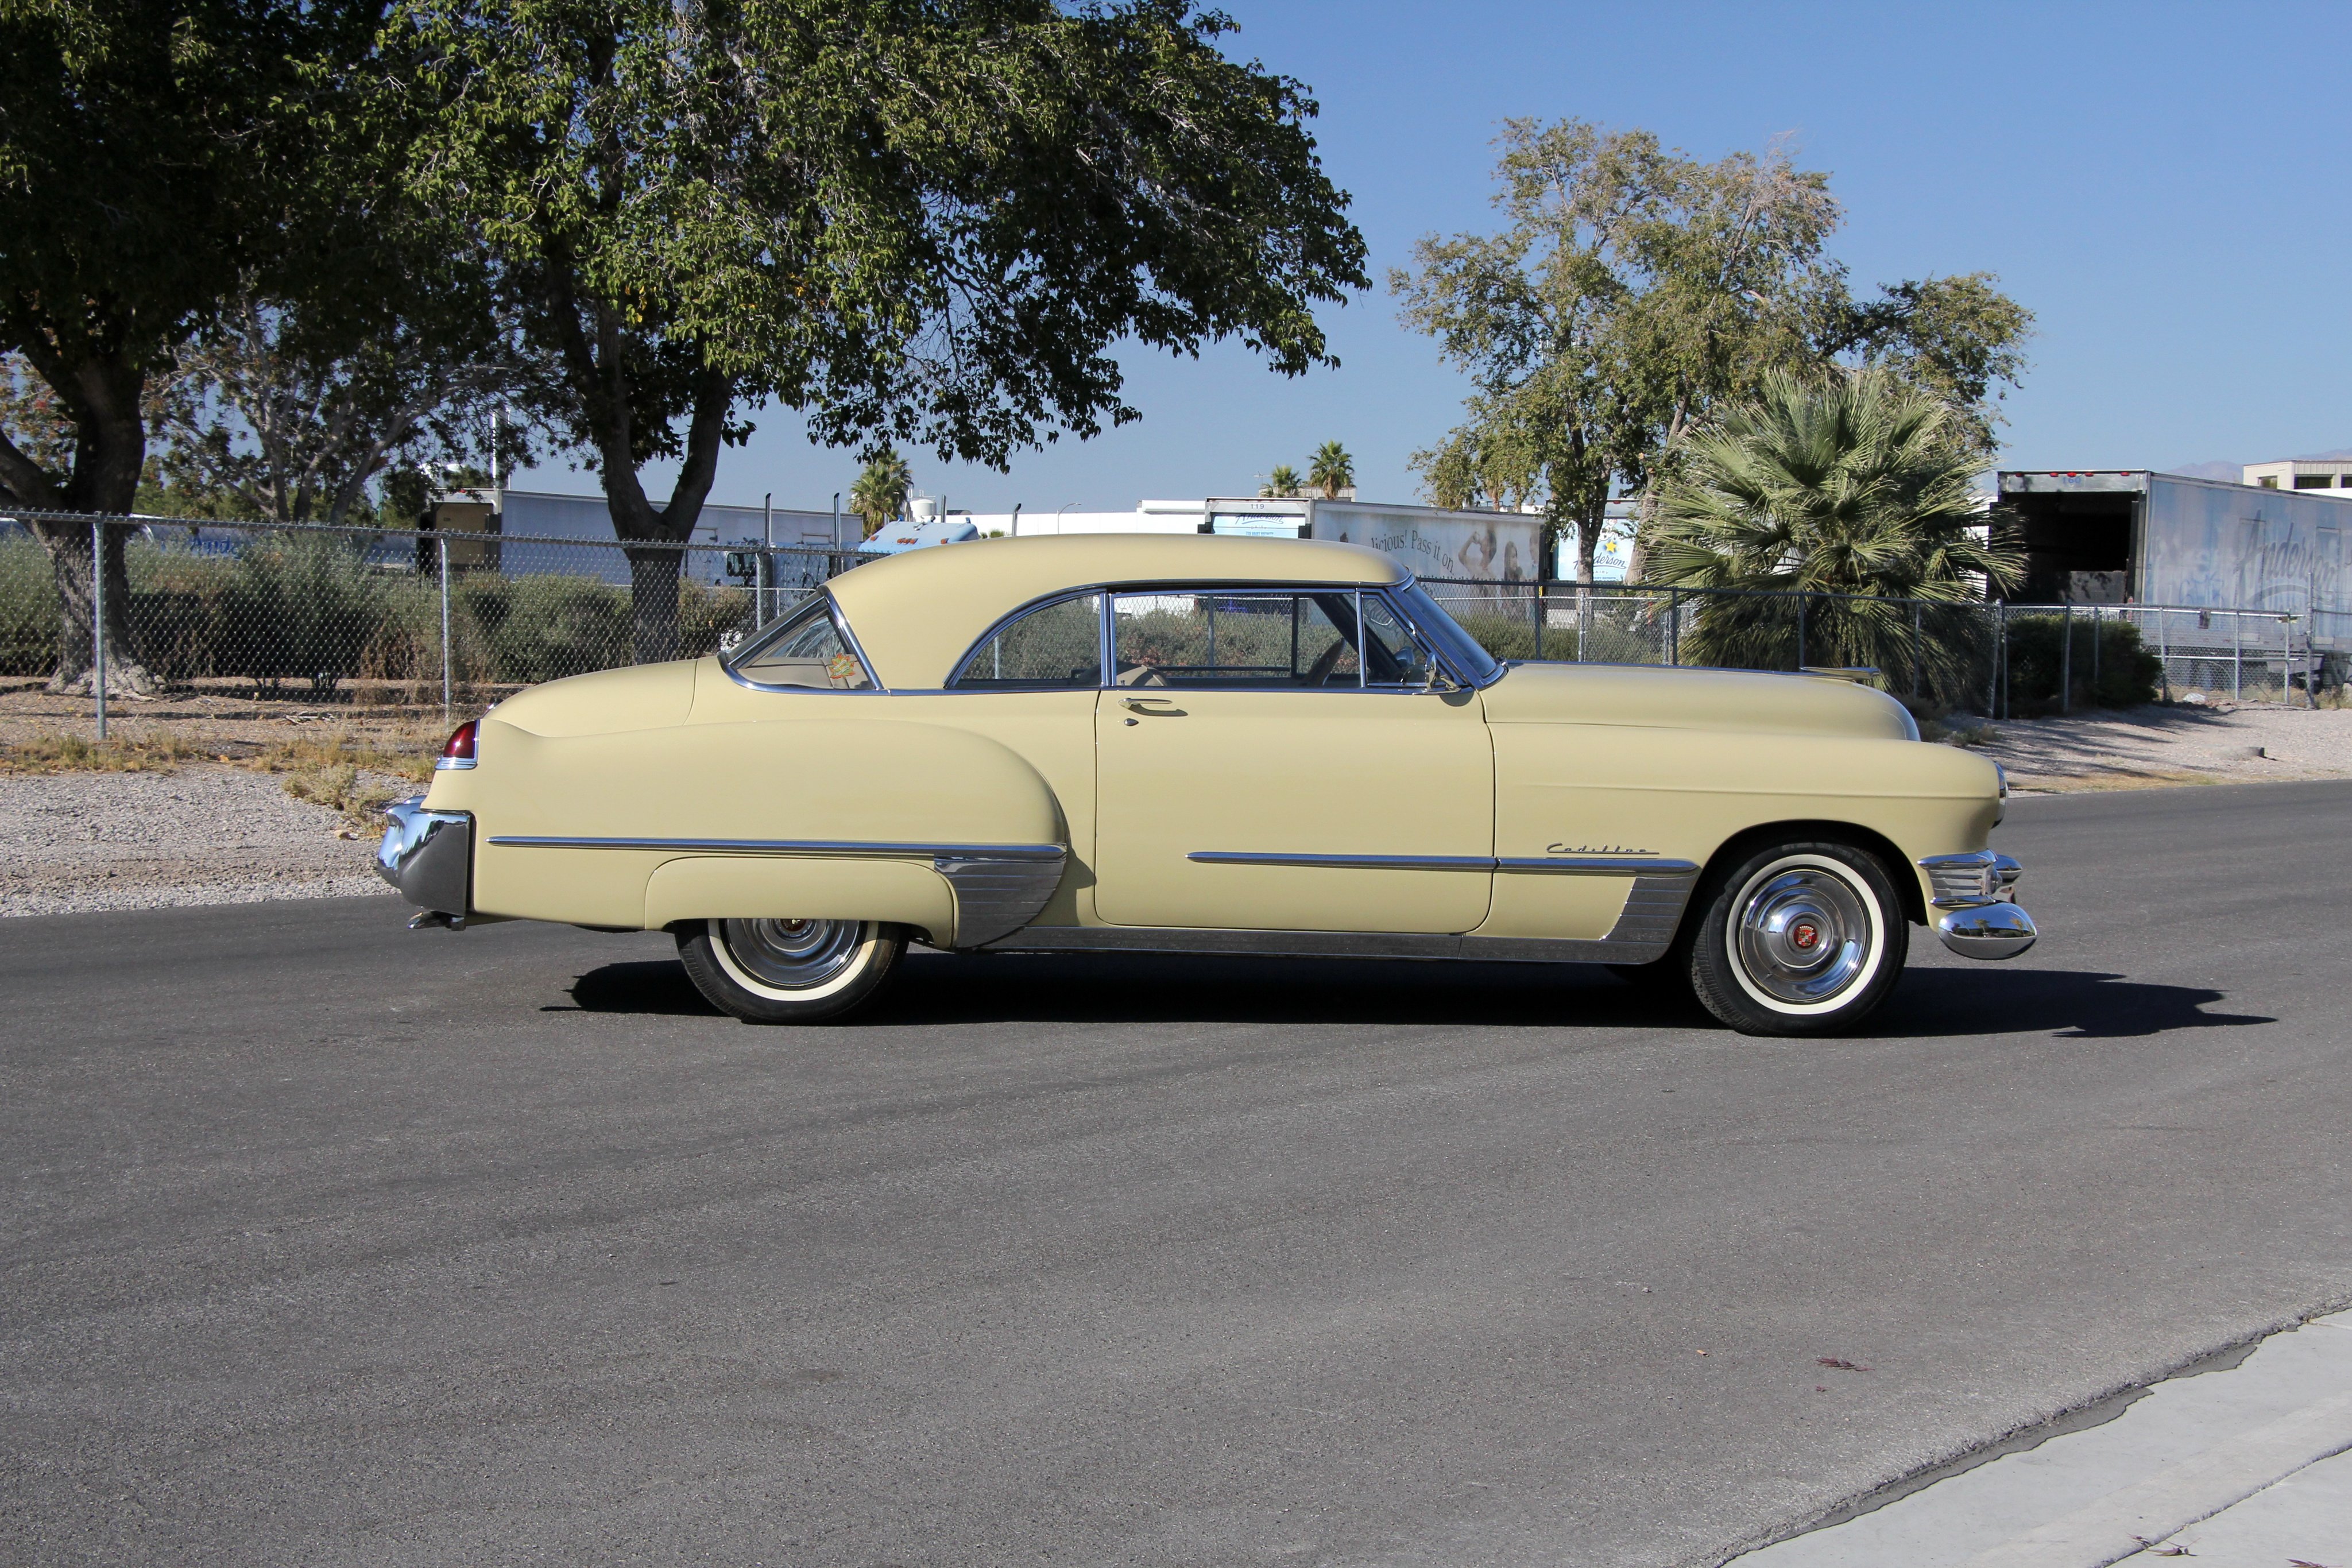 , 1949, Cadillac, Sixty two, Coupe, De, Ville, Cars, Classic Wallpaper